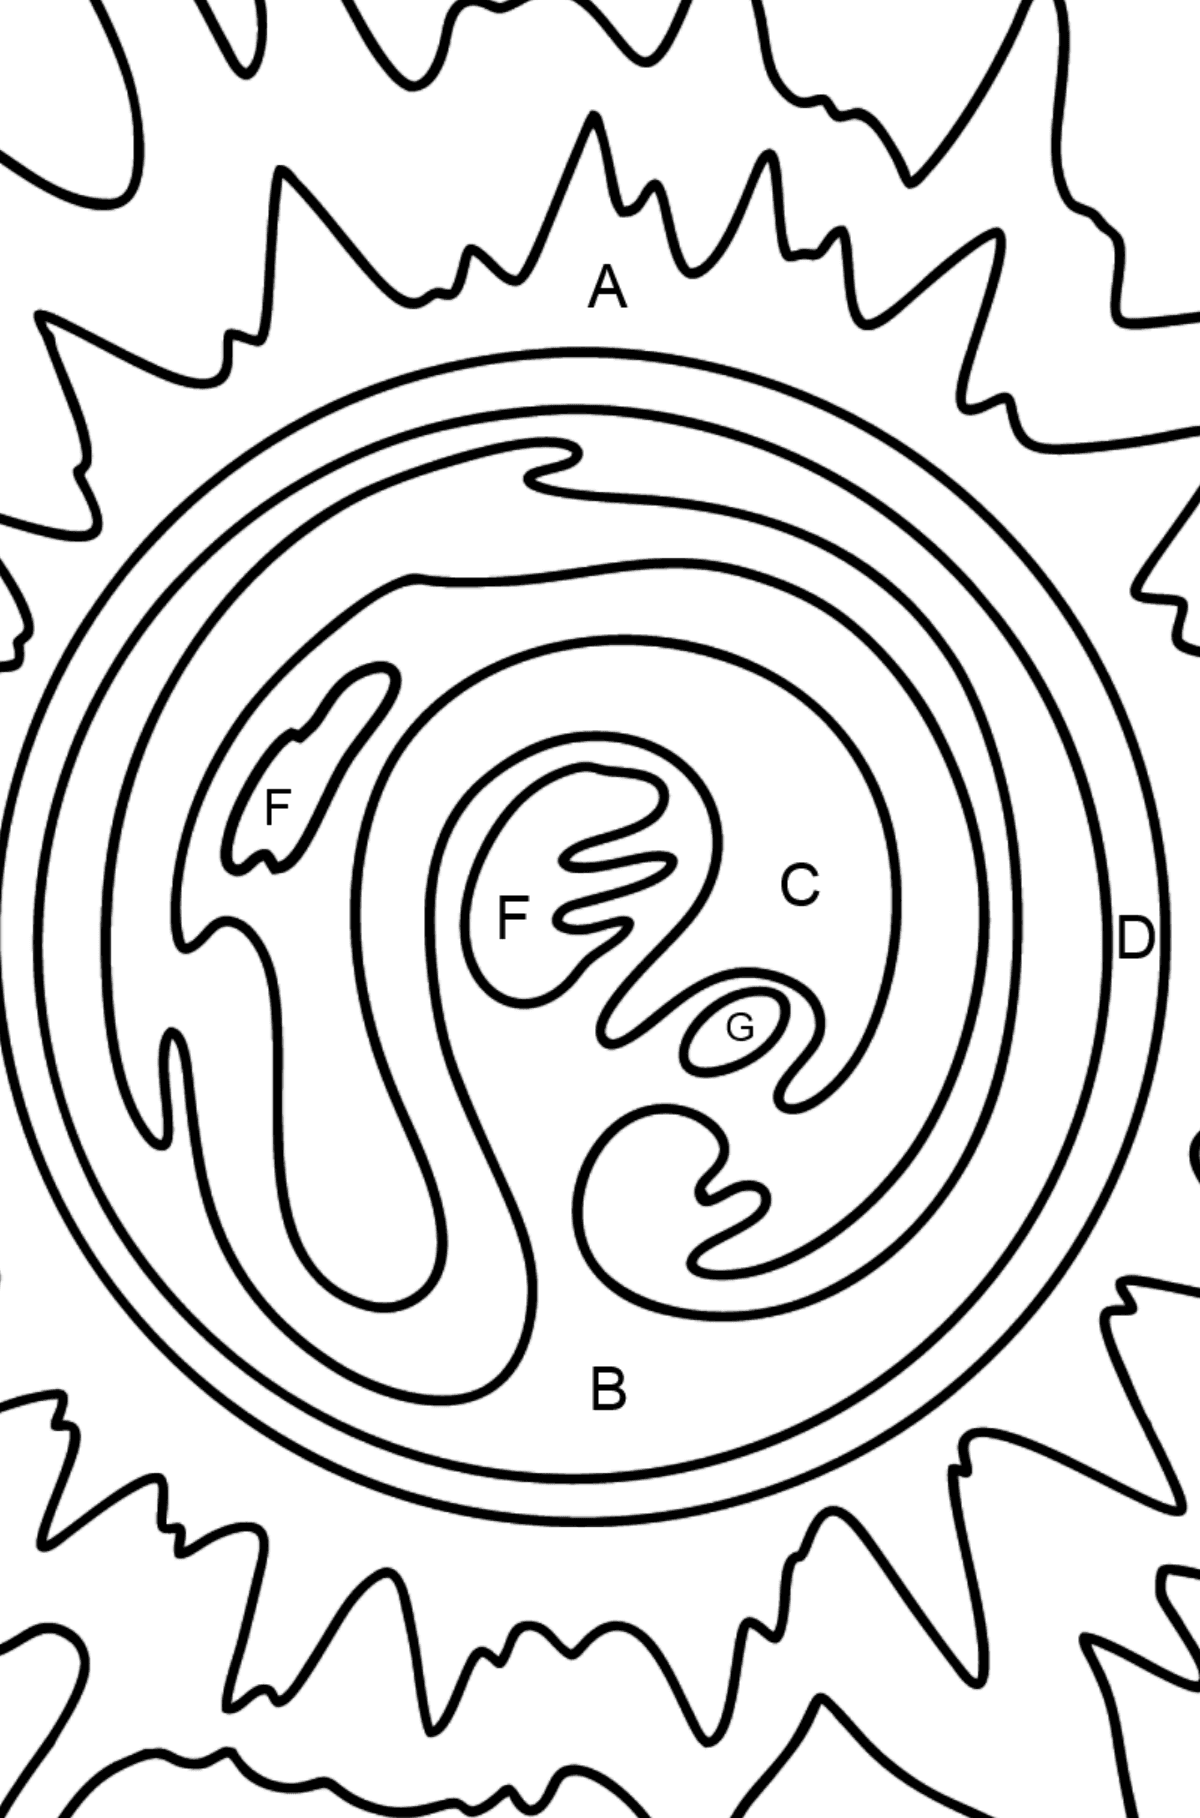 Sun coloring page - Coloring by Letters for Kids